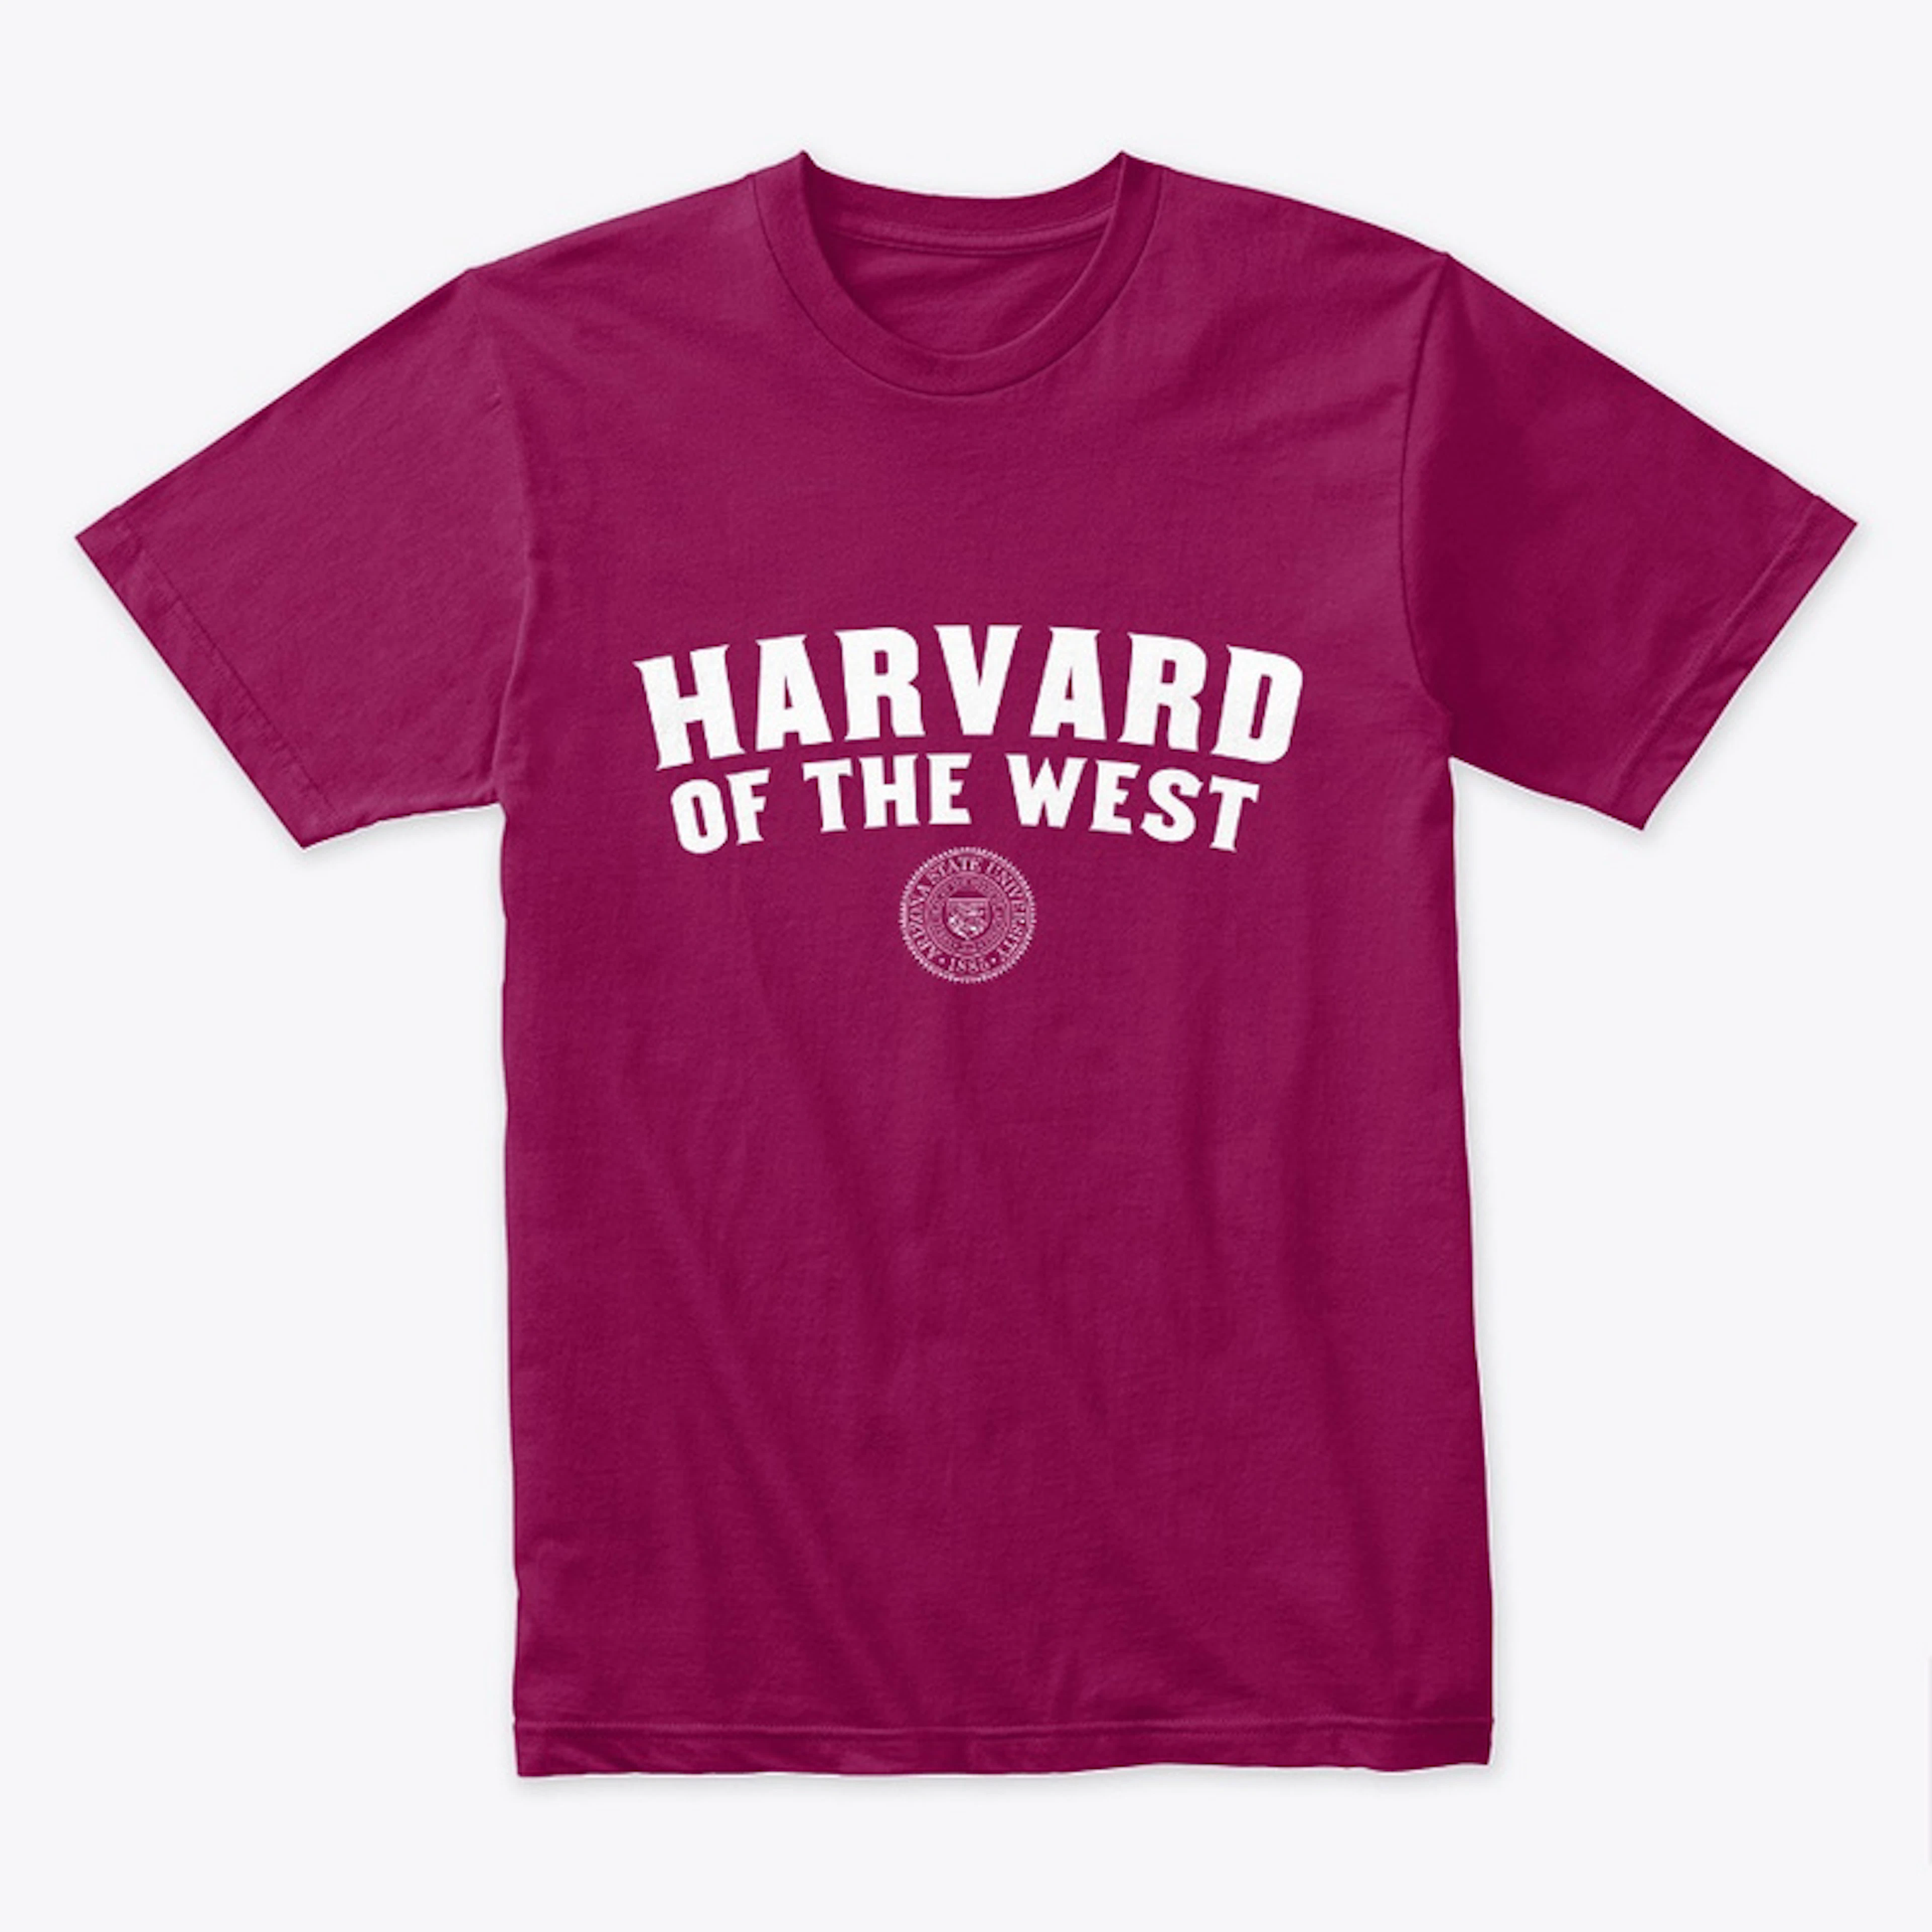 Harvard of the West